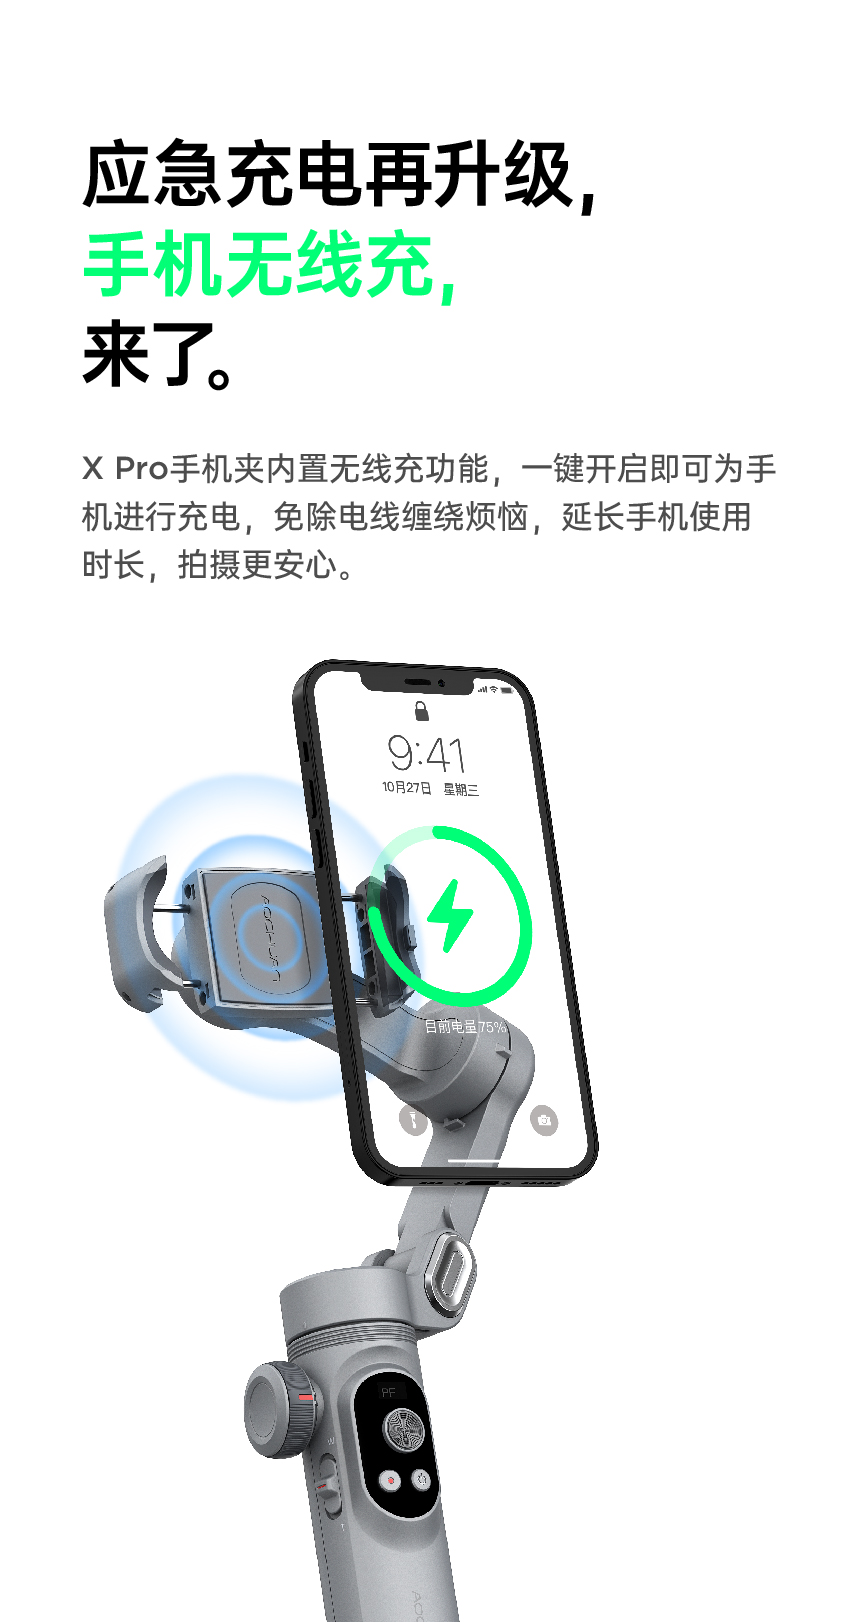 New three axis mobile phone gimbal with wireless charging feature